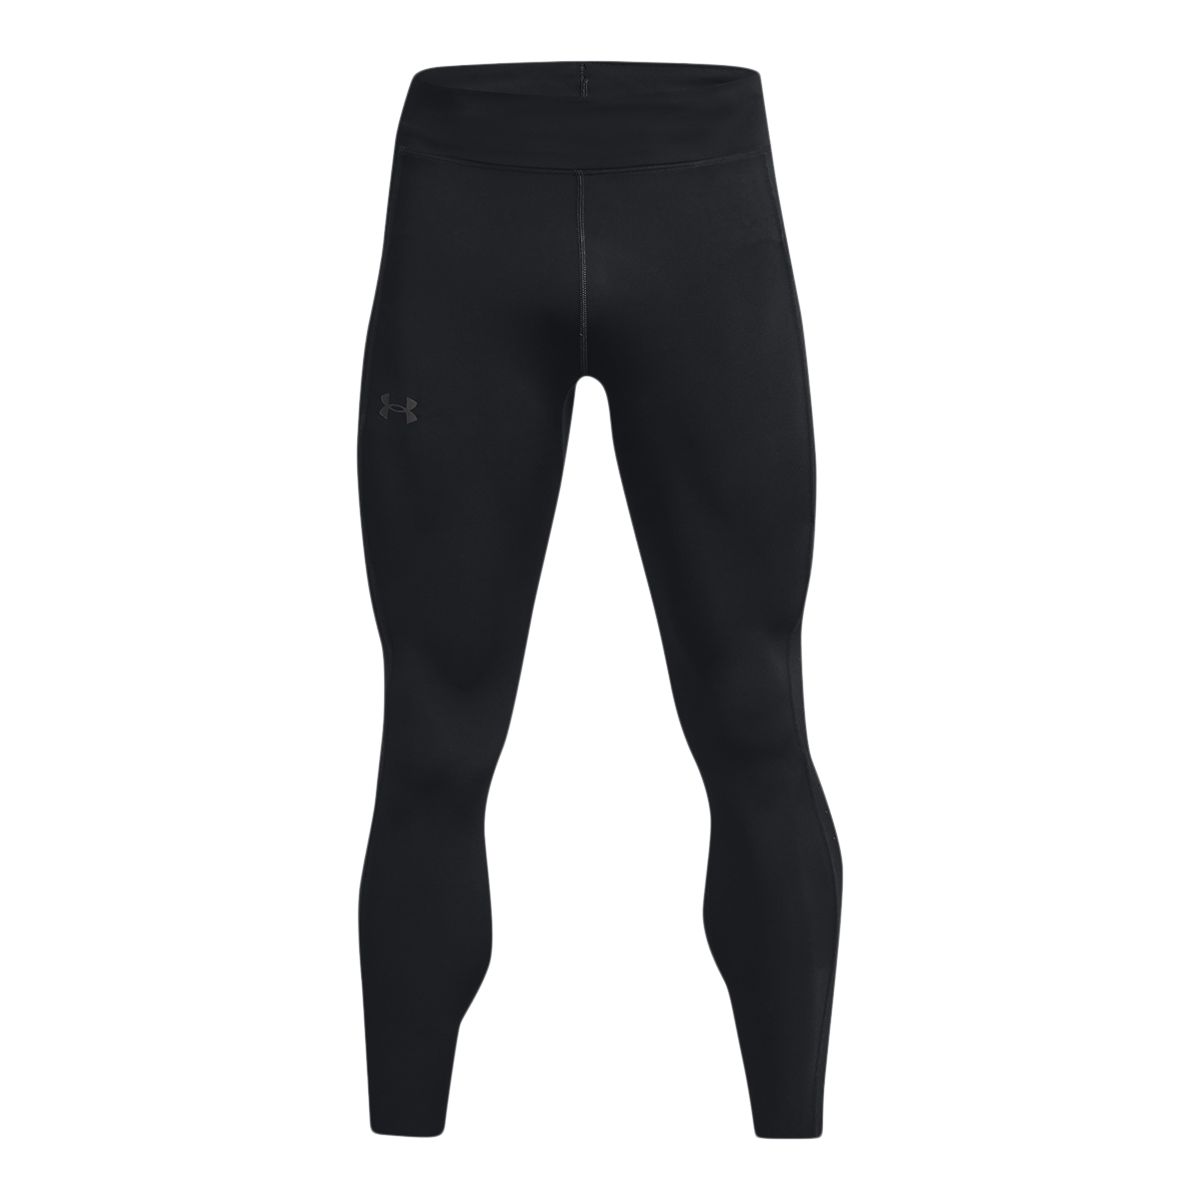 Under Armour Running Speedpocket tights in black and yellow, £42.00